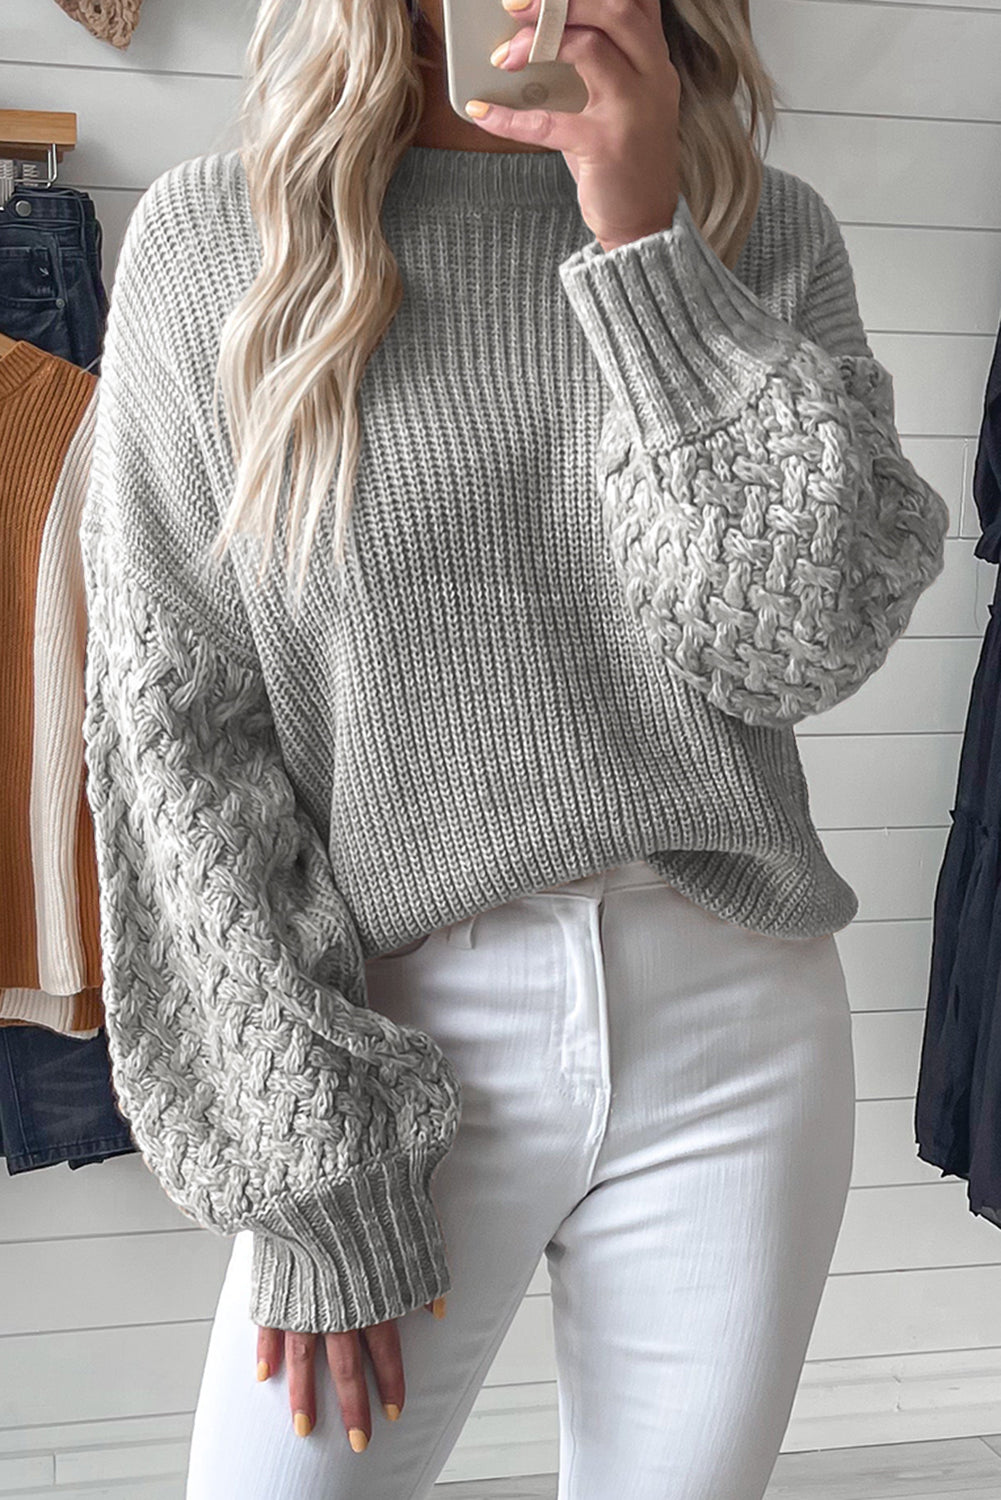 Black Cable Knit Sleeve Drop Shoulder Sweater